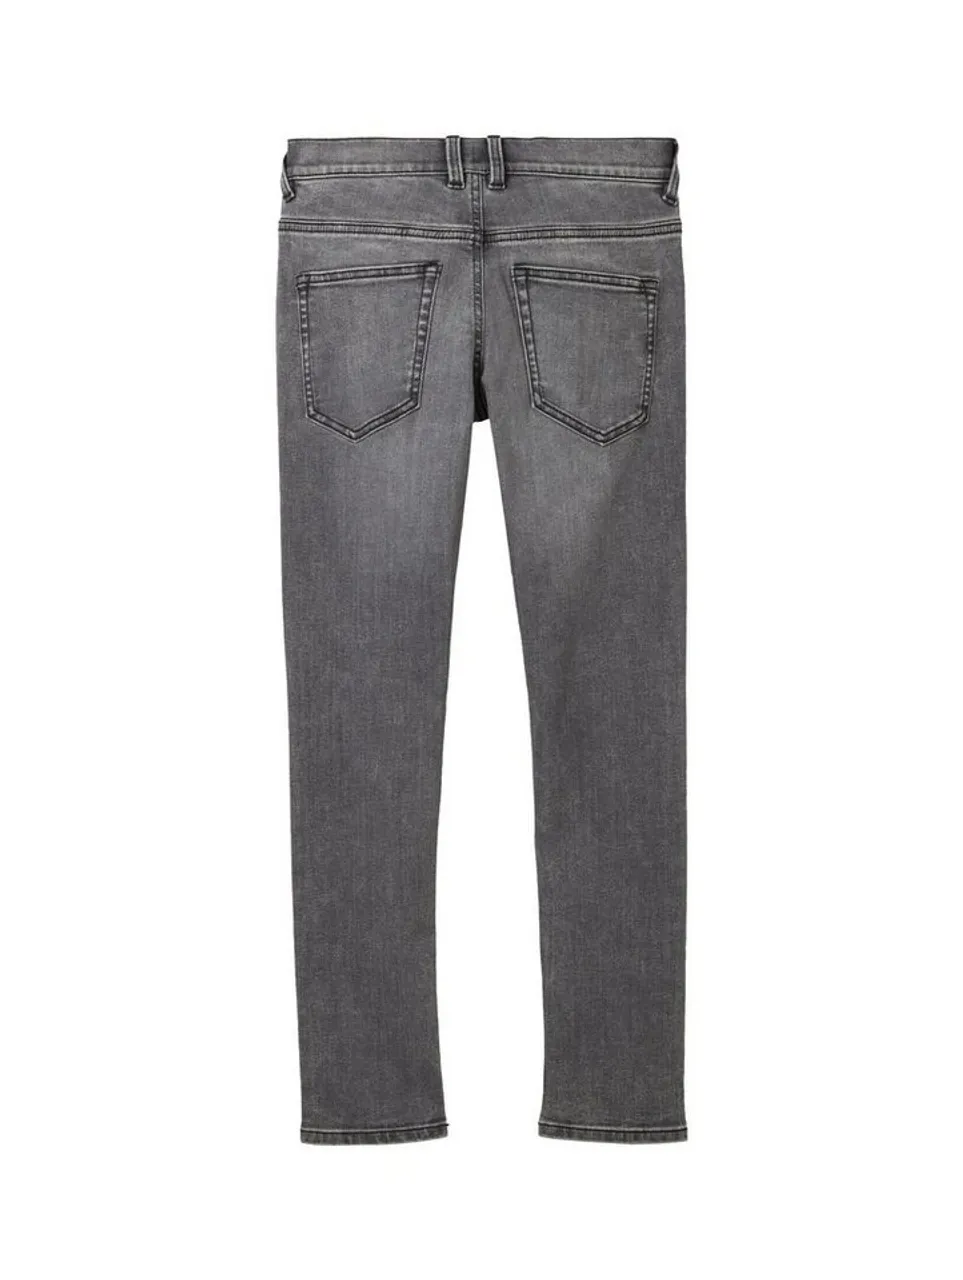 TOM TAILOR Gerade Jeans Ryan Jeans mit recycelter Baumwolle